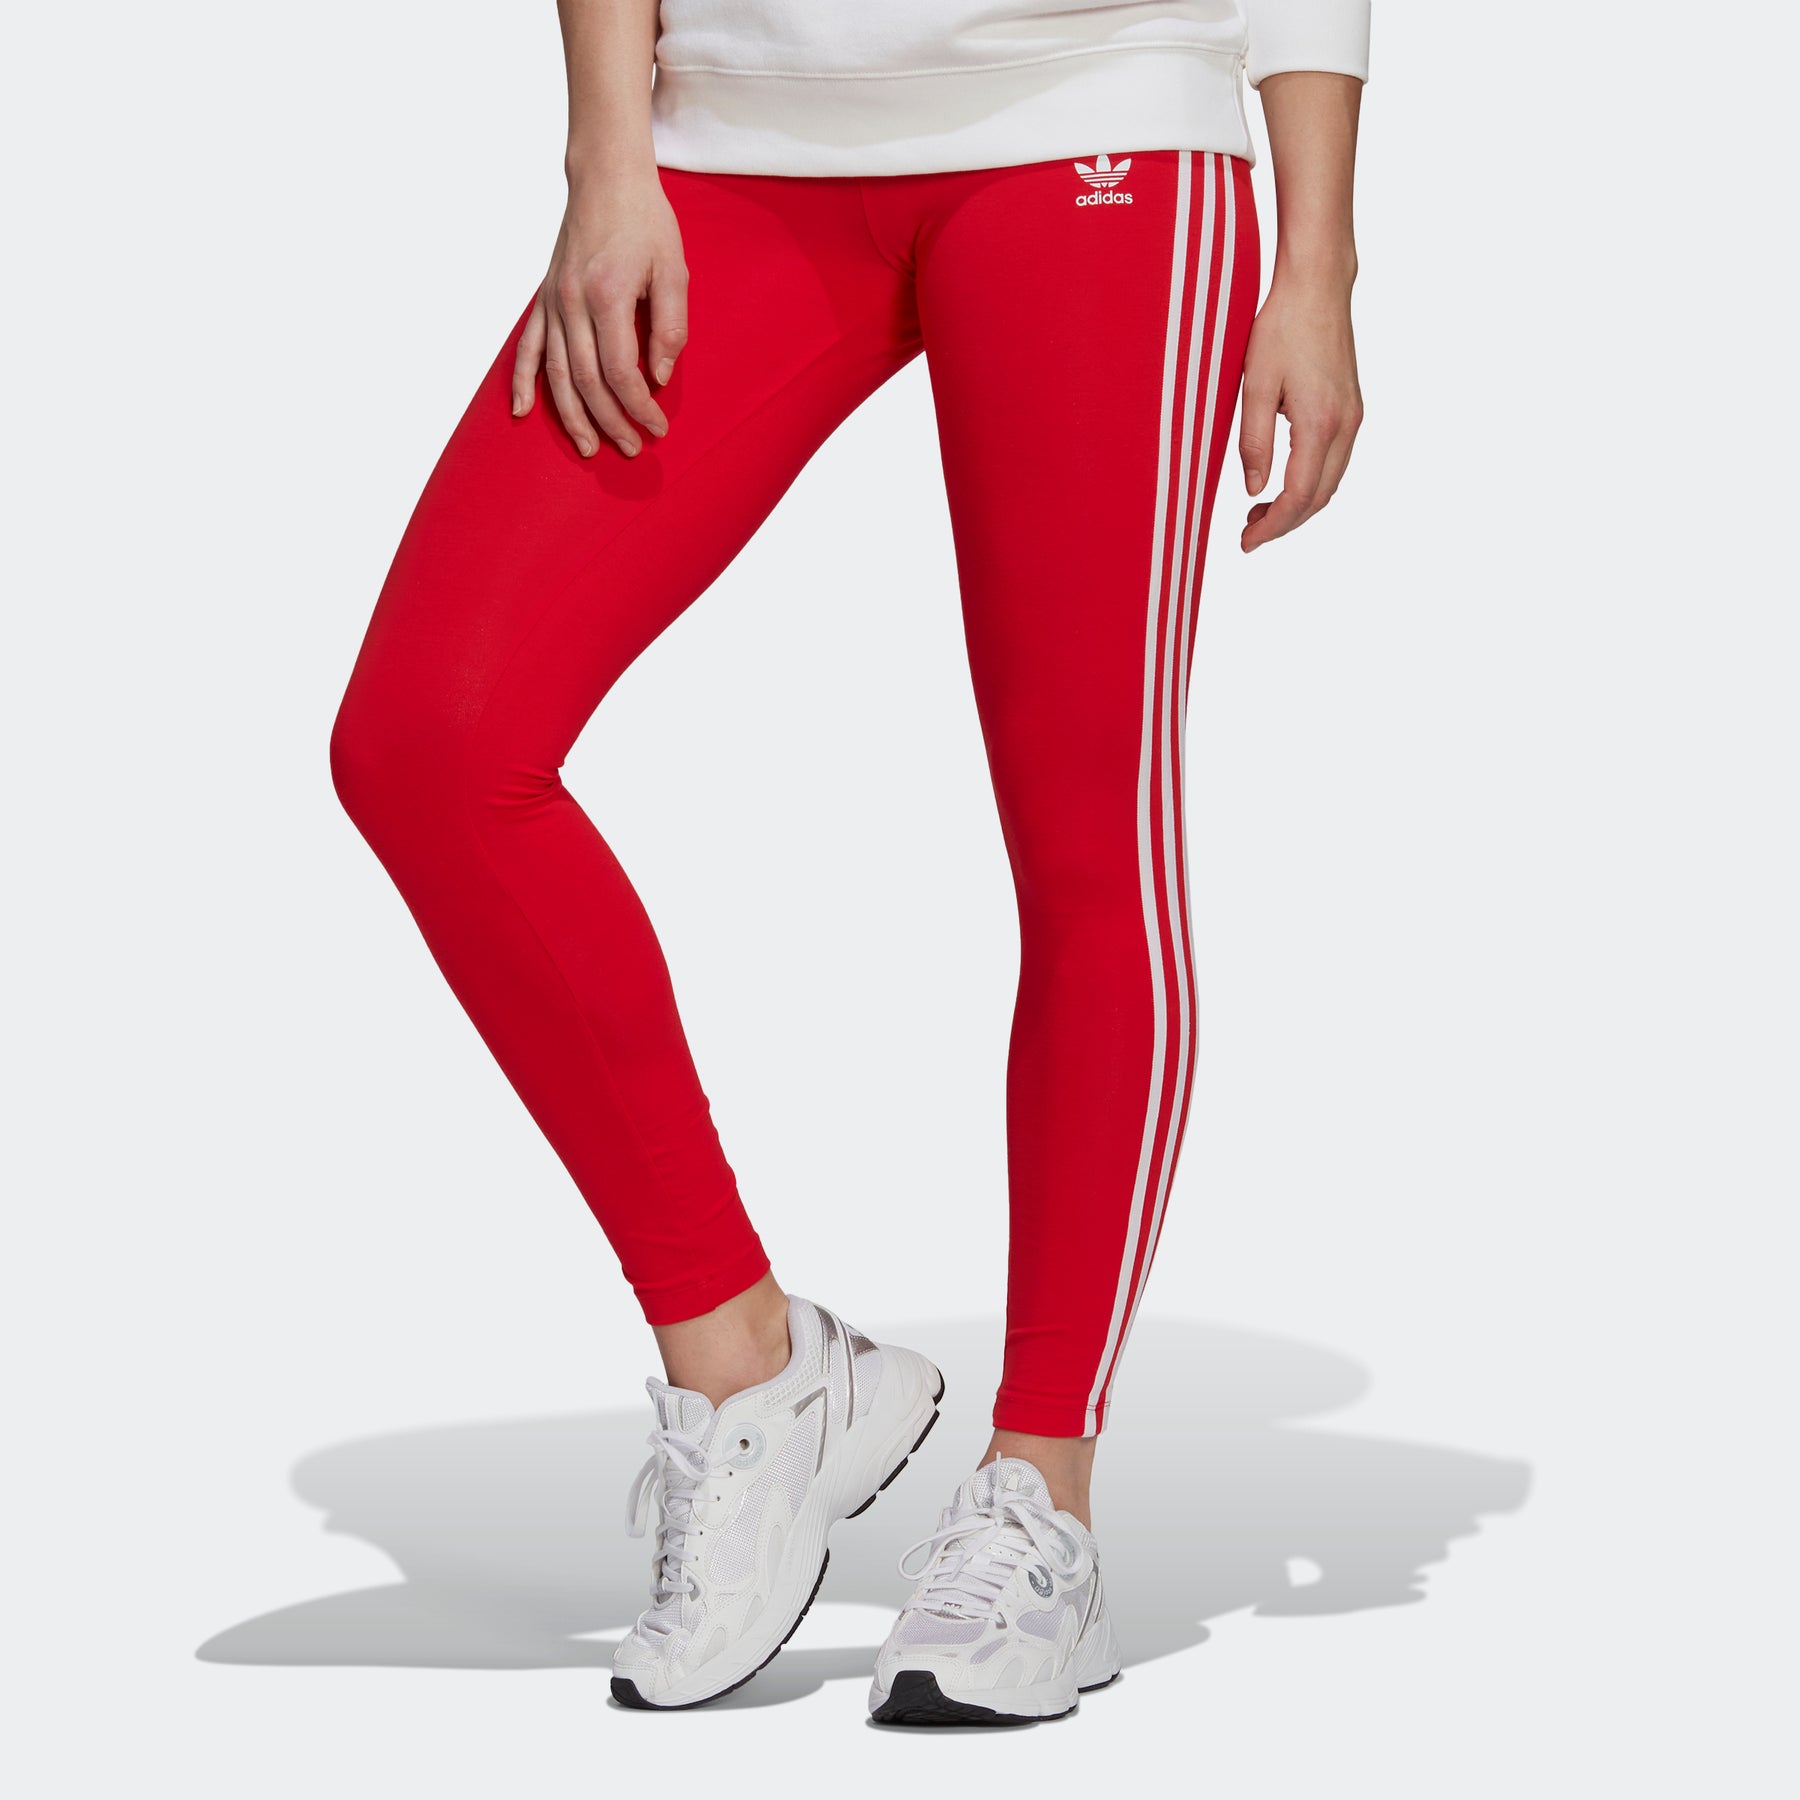 adidas Unisex Capable of Greatness Tights (Plus Size) - Training